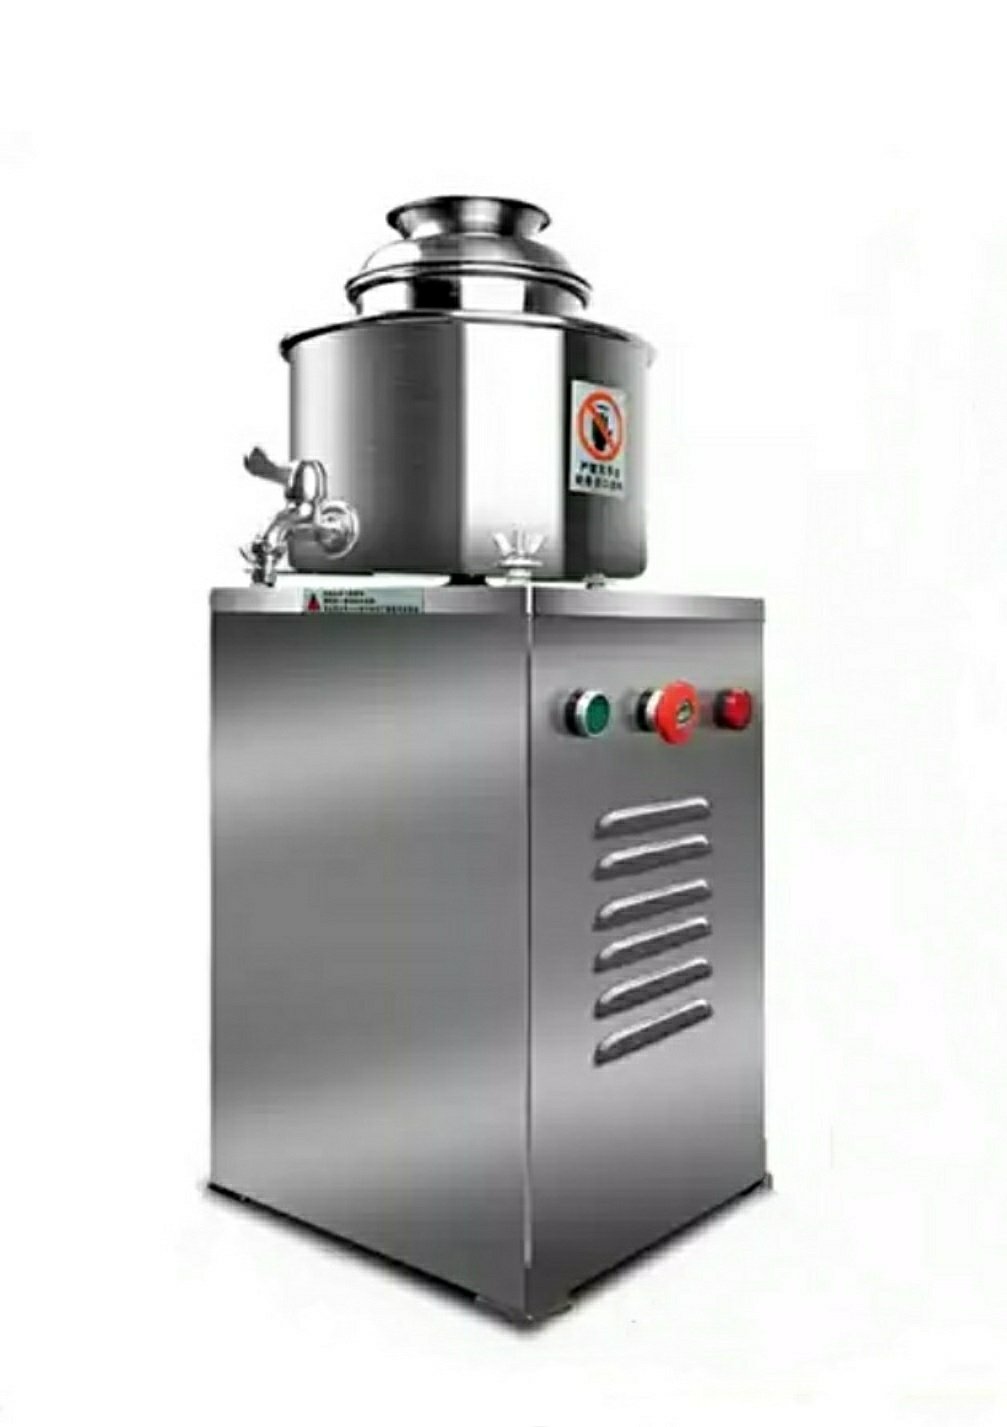 Meatball Machine - Meat Grinder Mincer Production 200 lbs per hr Meat ...